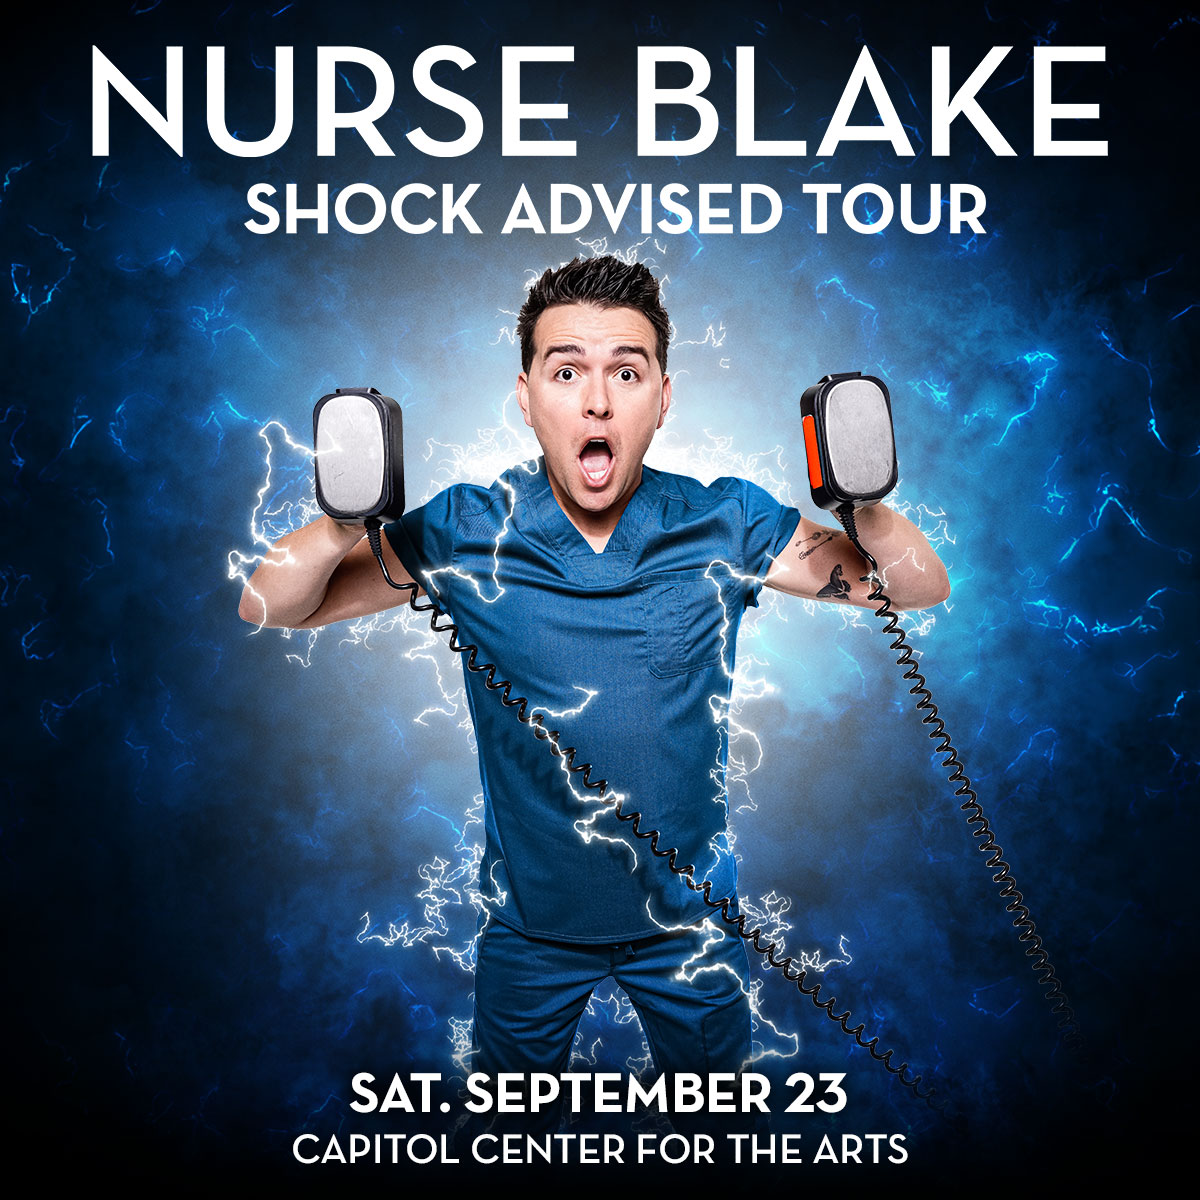 STAND CLEAR! Tonight #NurseBlake is going to SHOCK you with his wit at the #ChubbTheatre! Don't worry, he is a nurse so if anything happens he'll resuscitate you and you'll feel like a new person! Bring an AED cause this is going to get WILD! #ccanh #nurseblake #shockadvisedtour